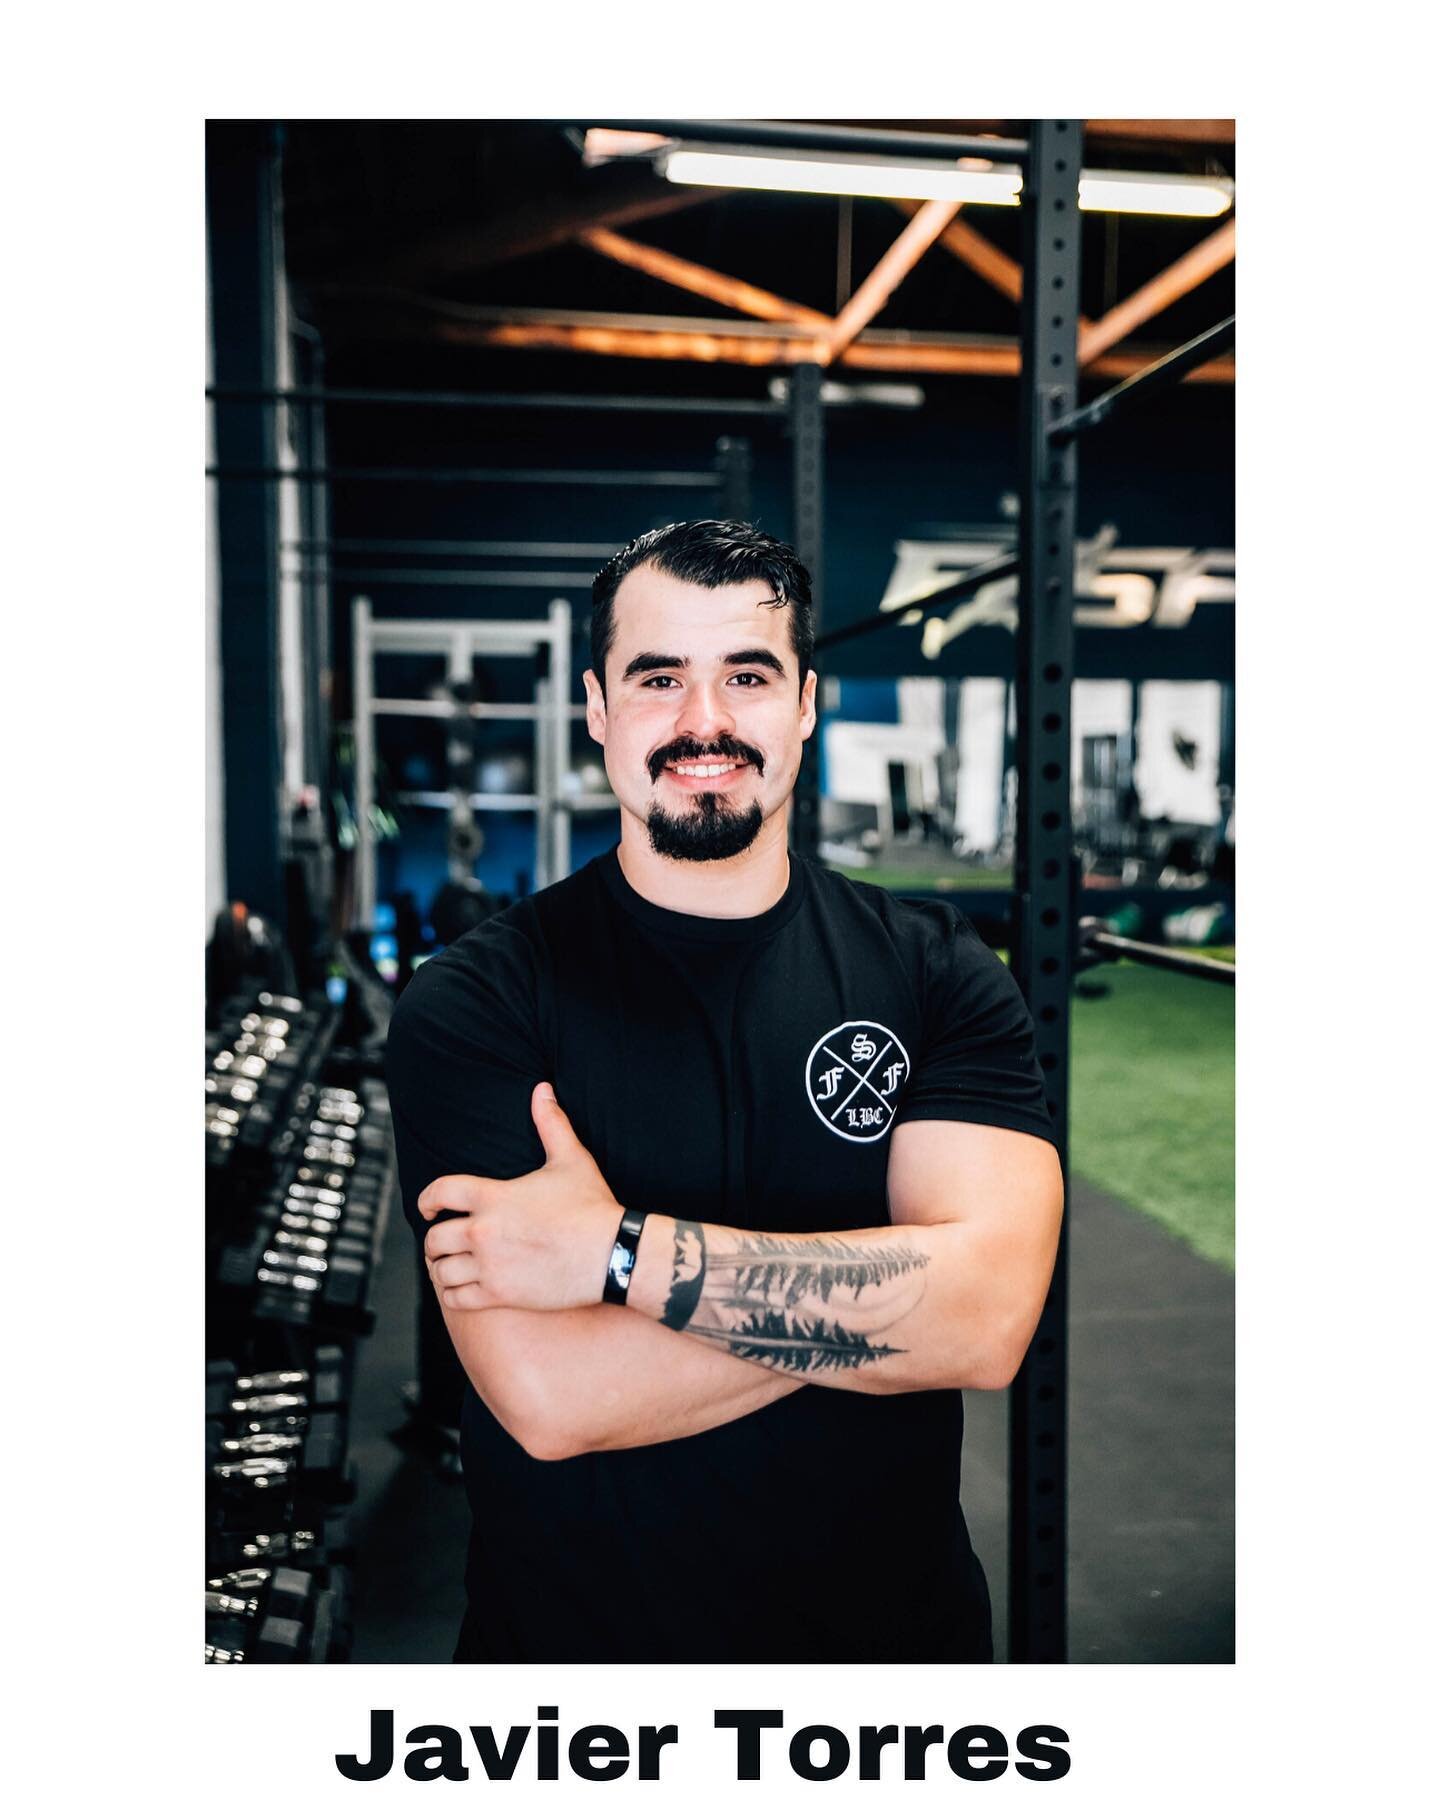 MEET OUR TEAM!
.
🏋🏻&zwj;♂️Javier Torres: Owner / CEO
.
🏋🏻&zwj;♂️Courtney Baron: Owner / COO
.
🏋🏻&zwj;♂️Arielly Conde: Team / Private Coach
.
🏋🏻&zwj;♂️Jenny Brennecke: Injury Prevention &amp; Rehabilitation Specialist / Private Coach
.
.
This 